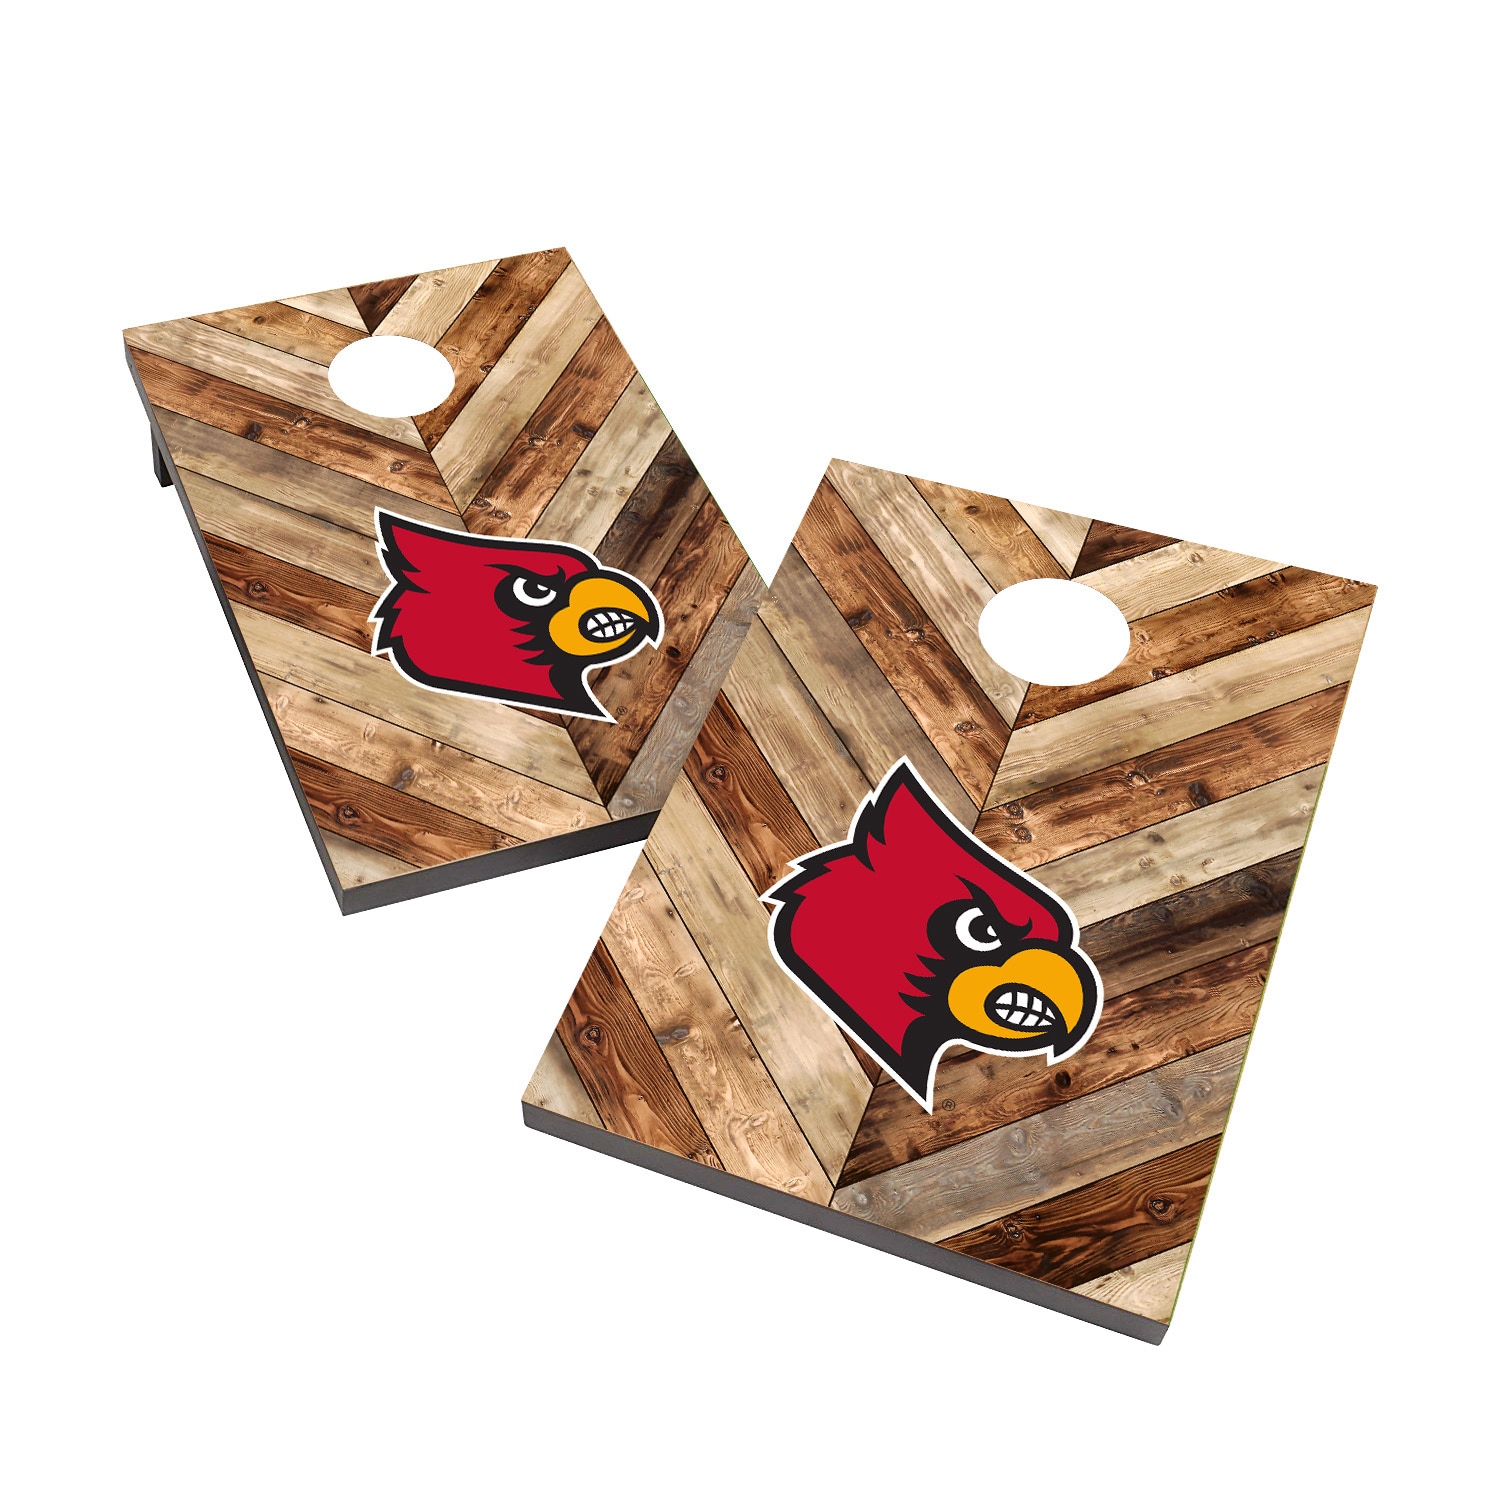 Picnic Time Louisville Cardinals Blanket Tote